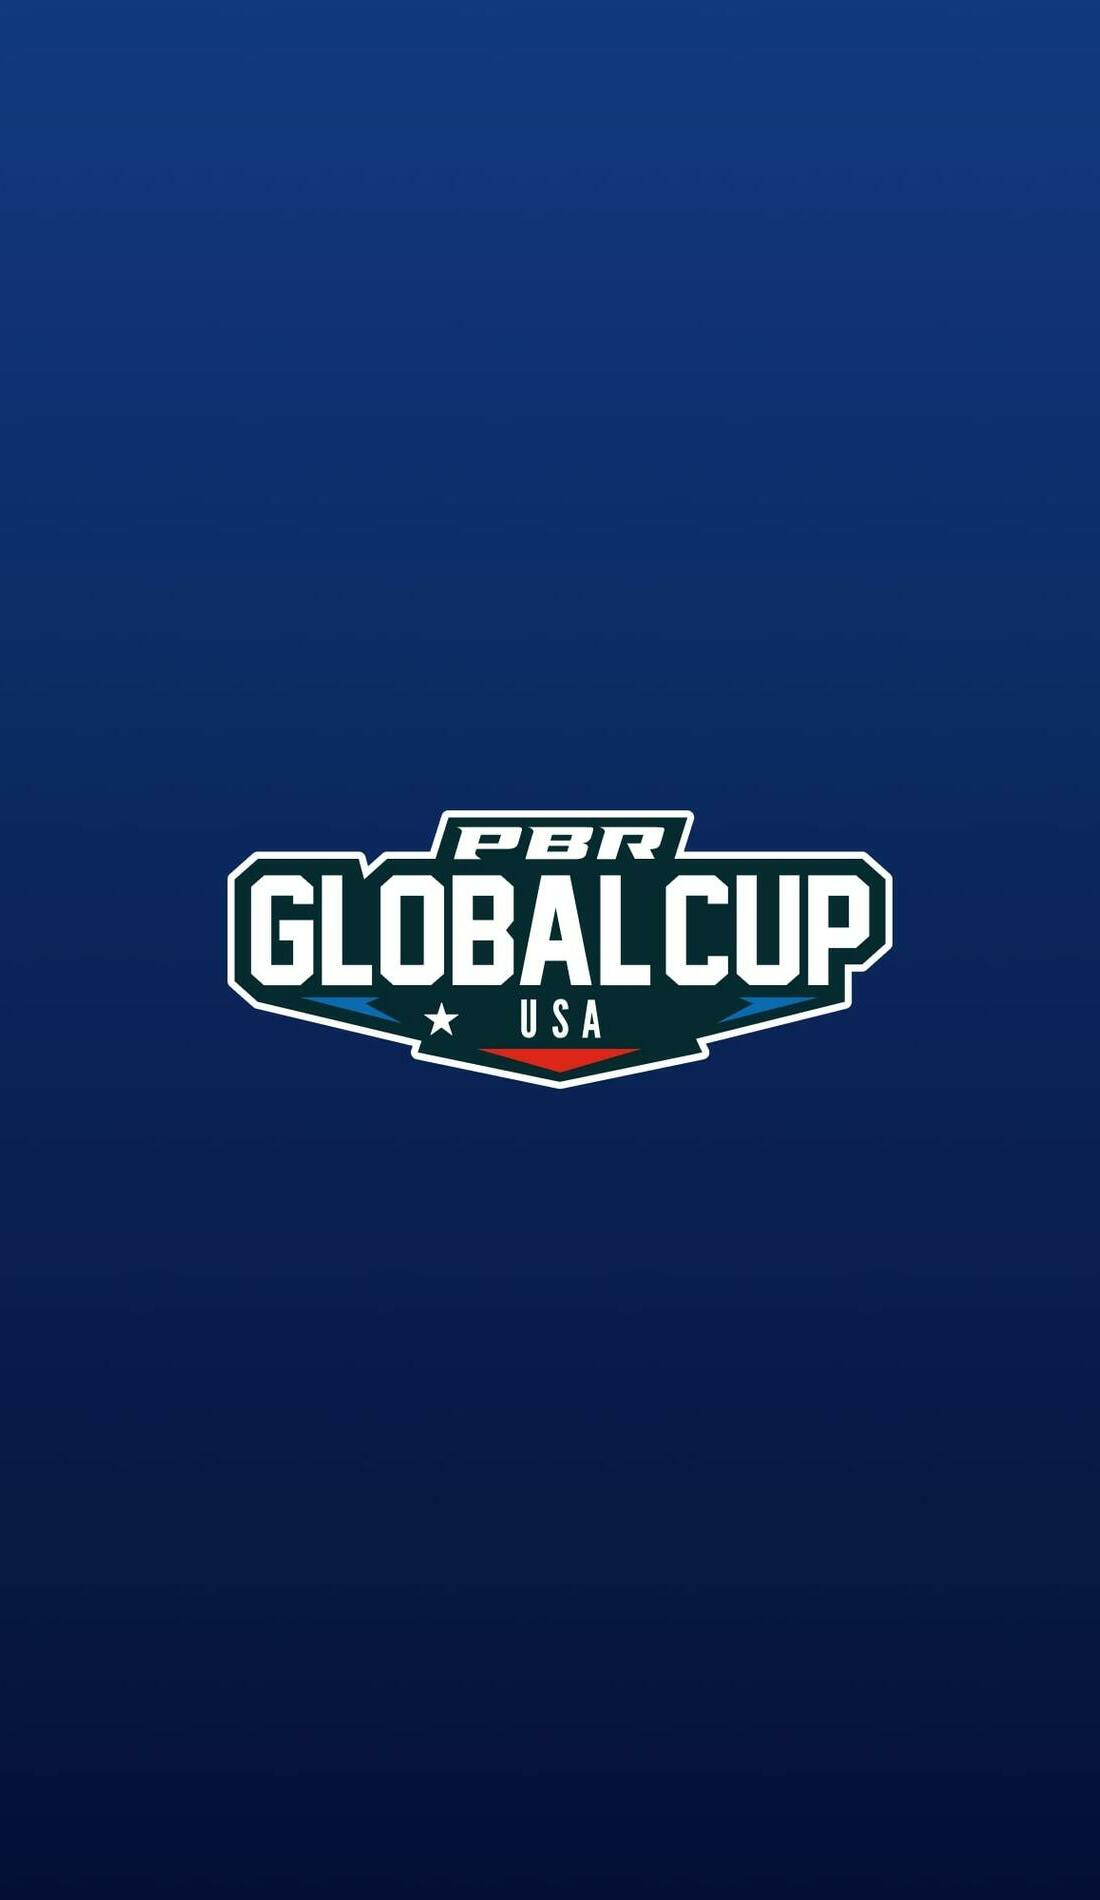 A PBR: Global Cup live event